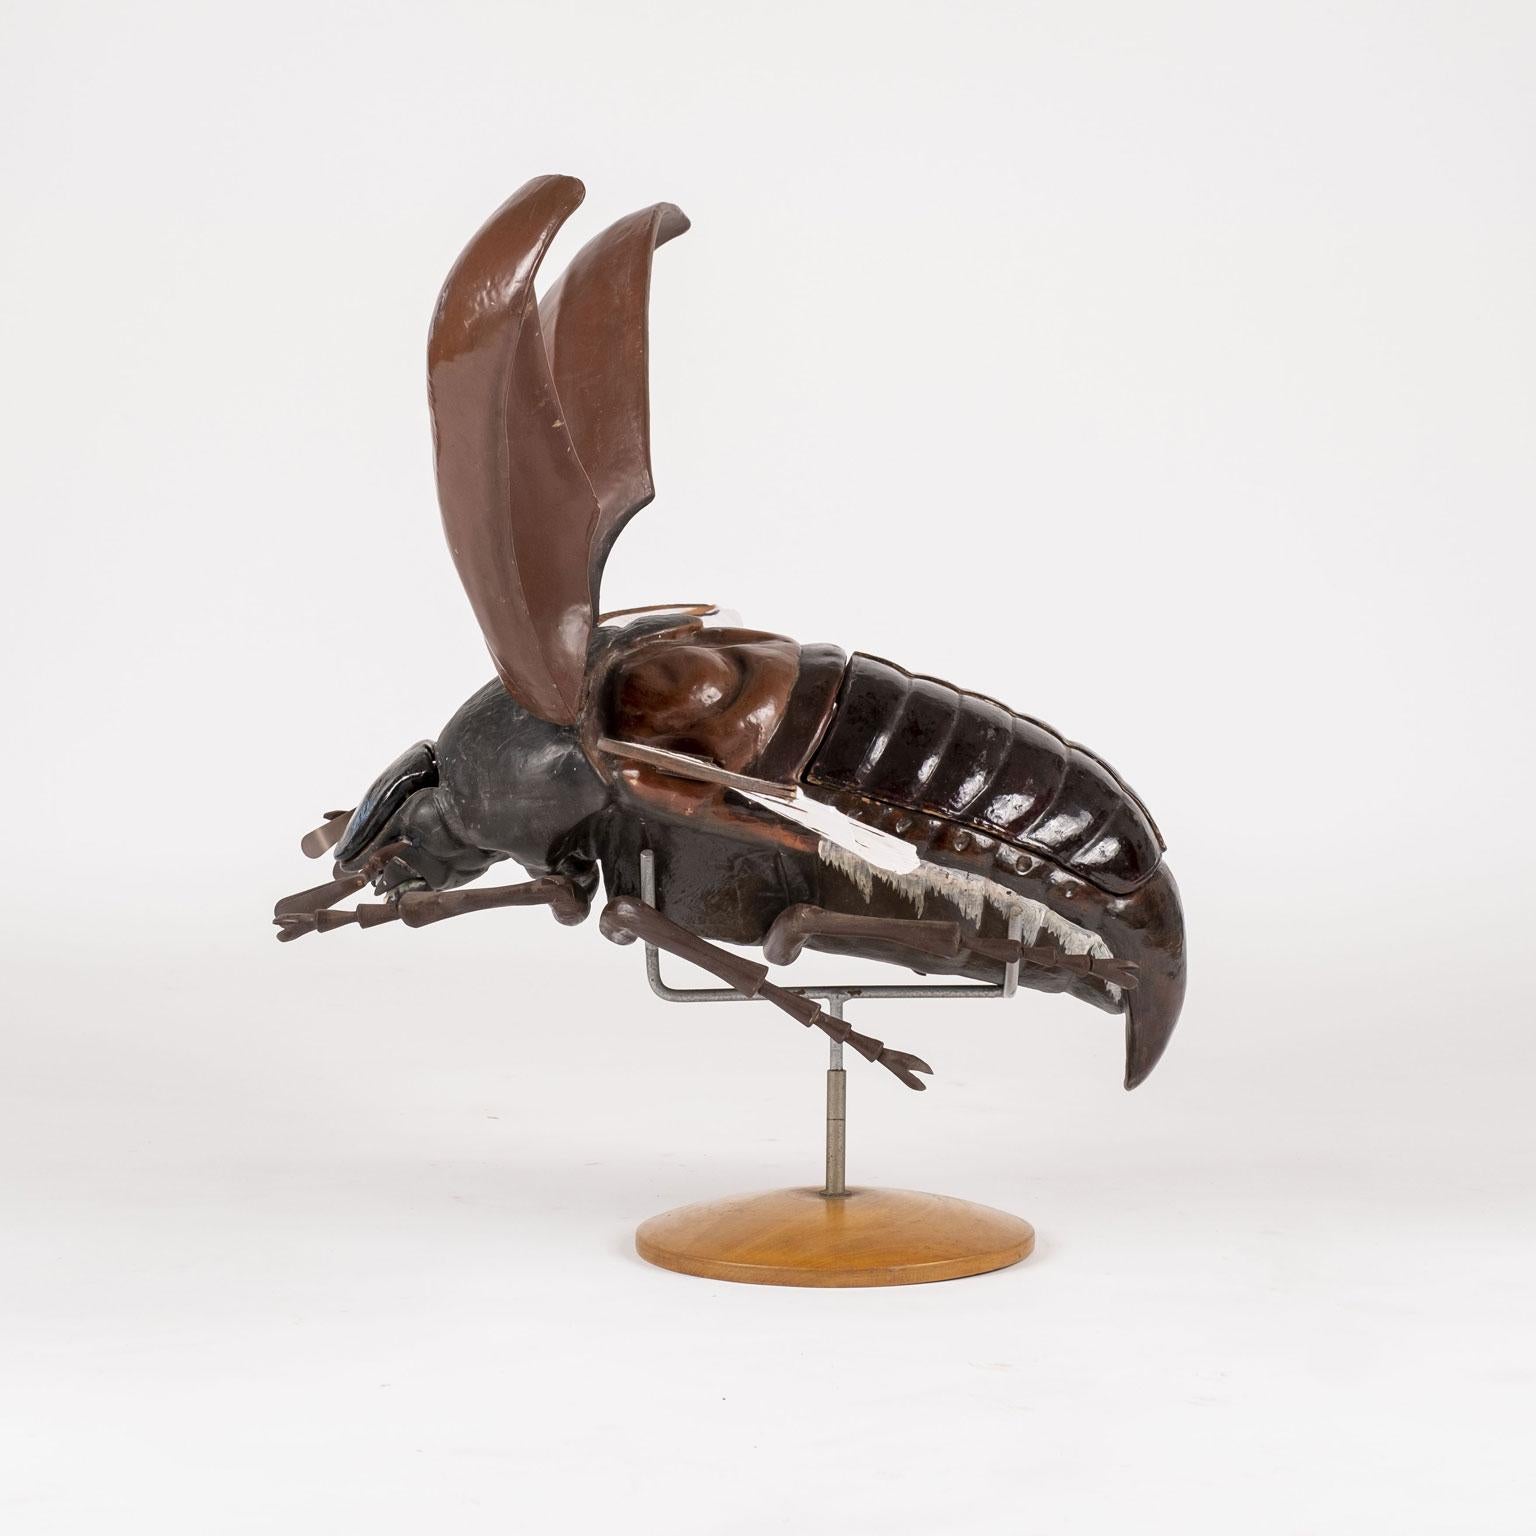 Fabric Large Sculpture of Beetle in Flight